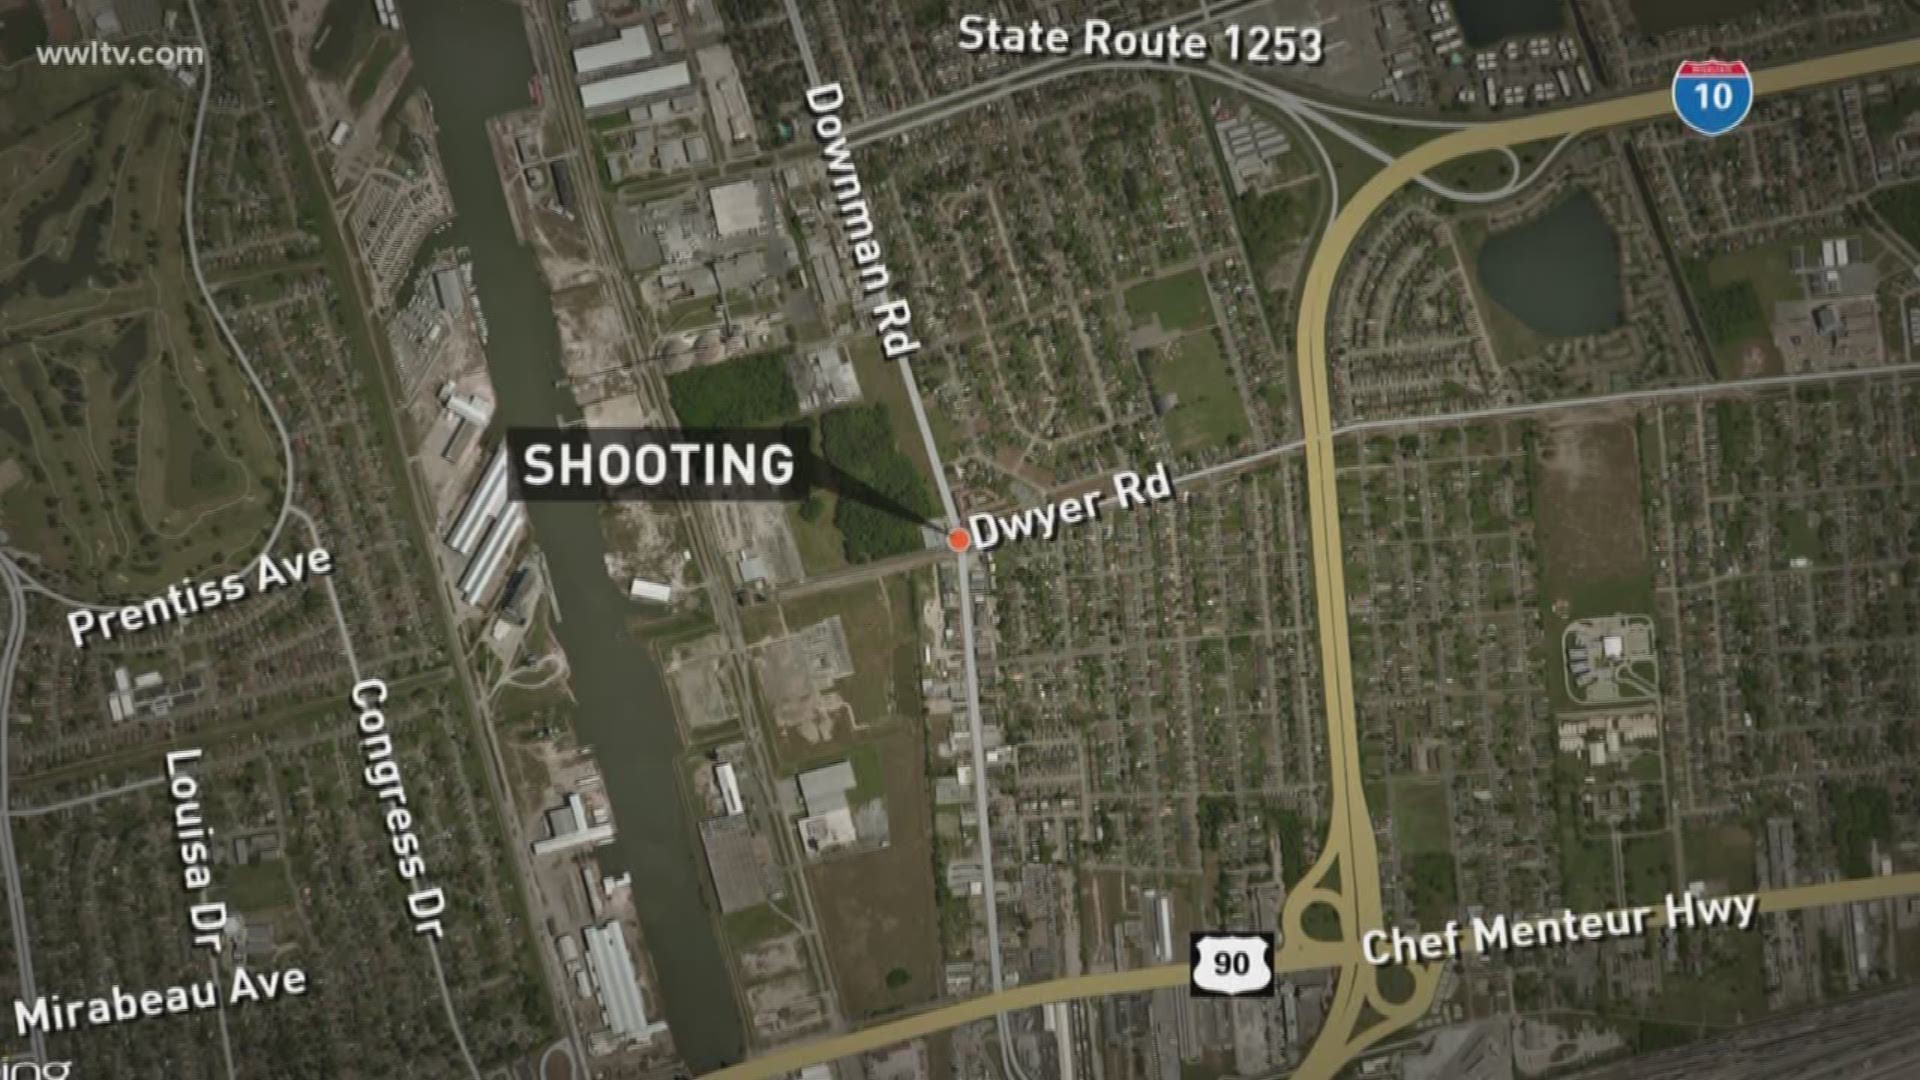 Initial reports from police show one man was shot in the back.